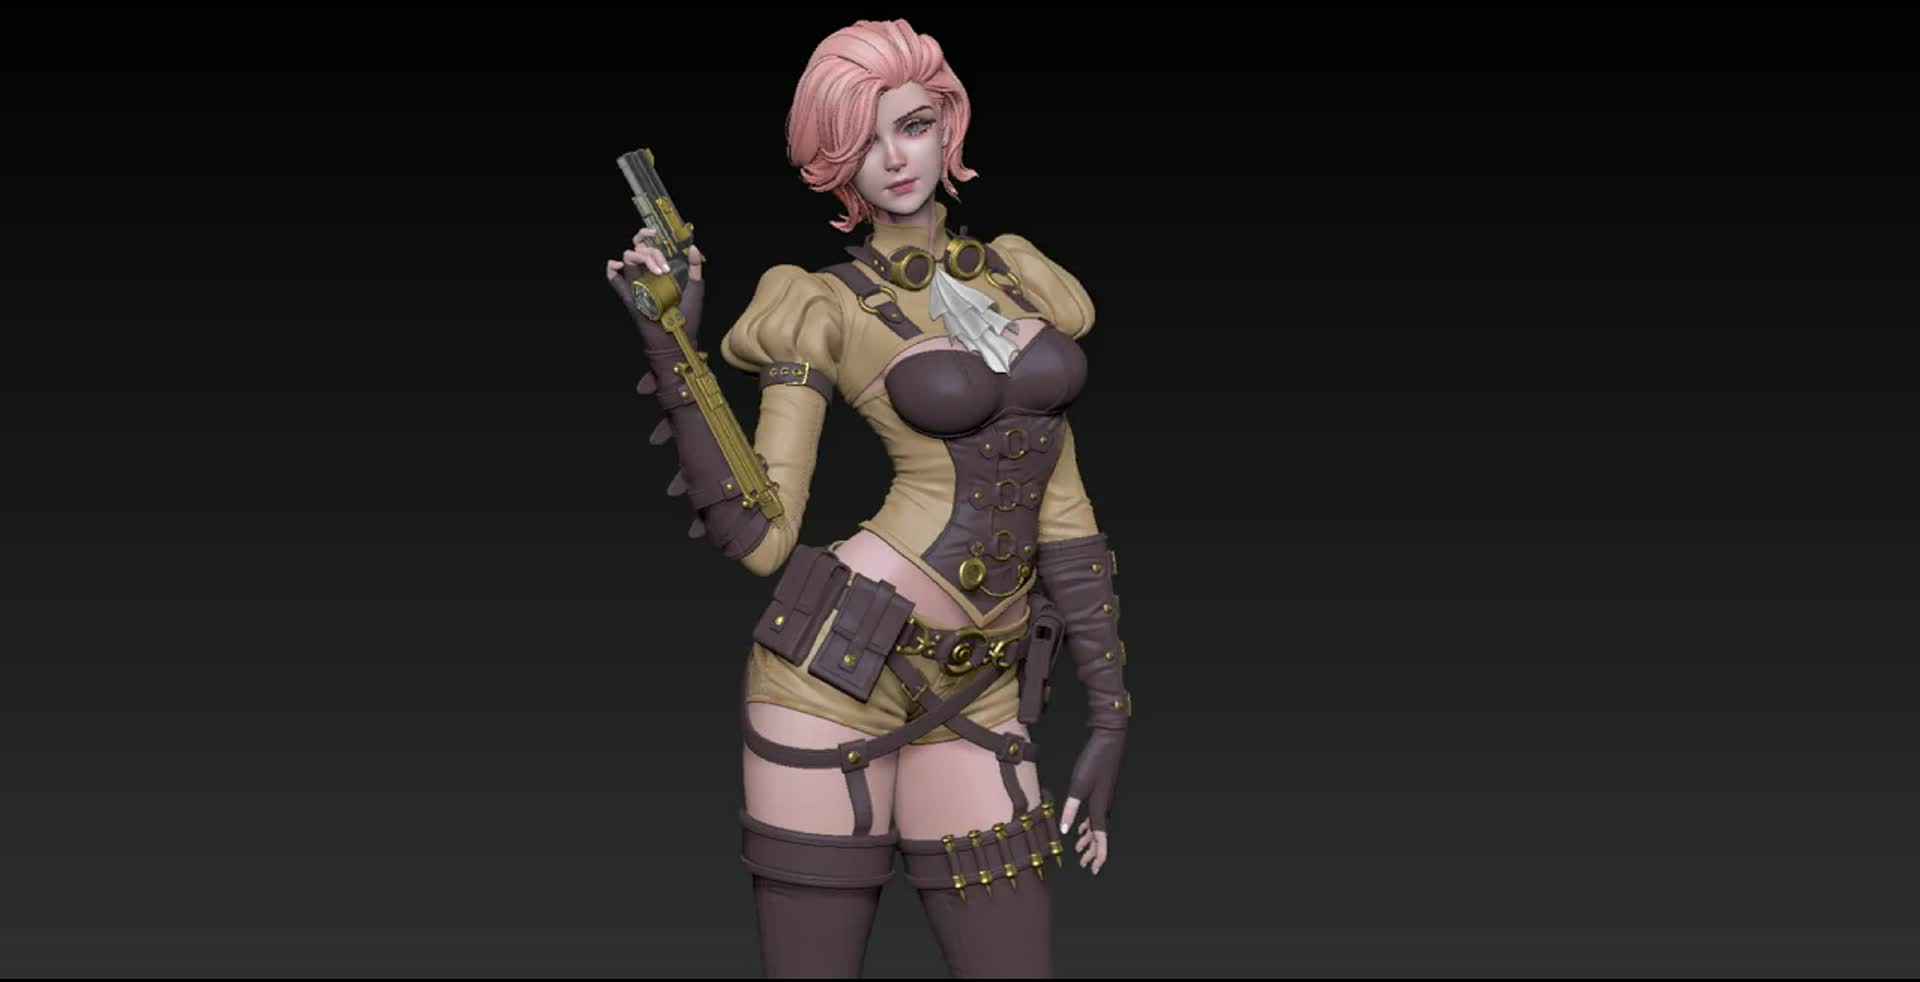 ArtStation - Steam Gate, TRPG game character, nixell cho  Steampunk  characters, Steampunk illustration, Game character